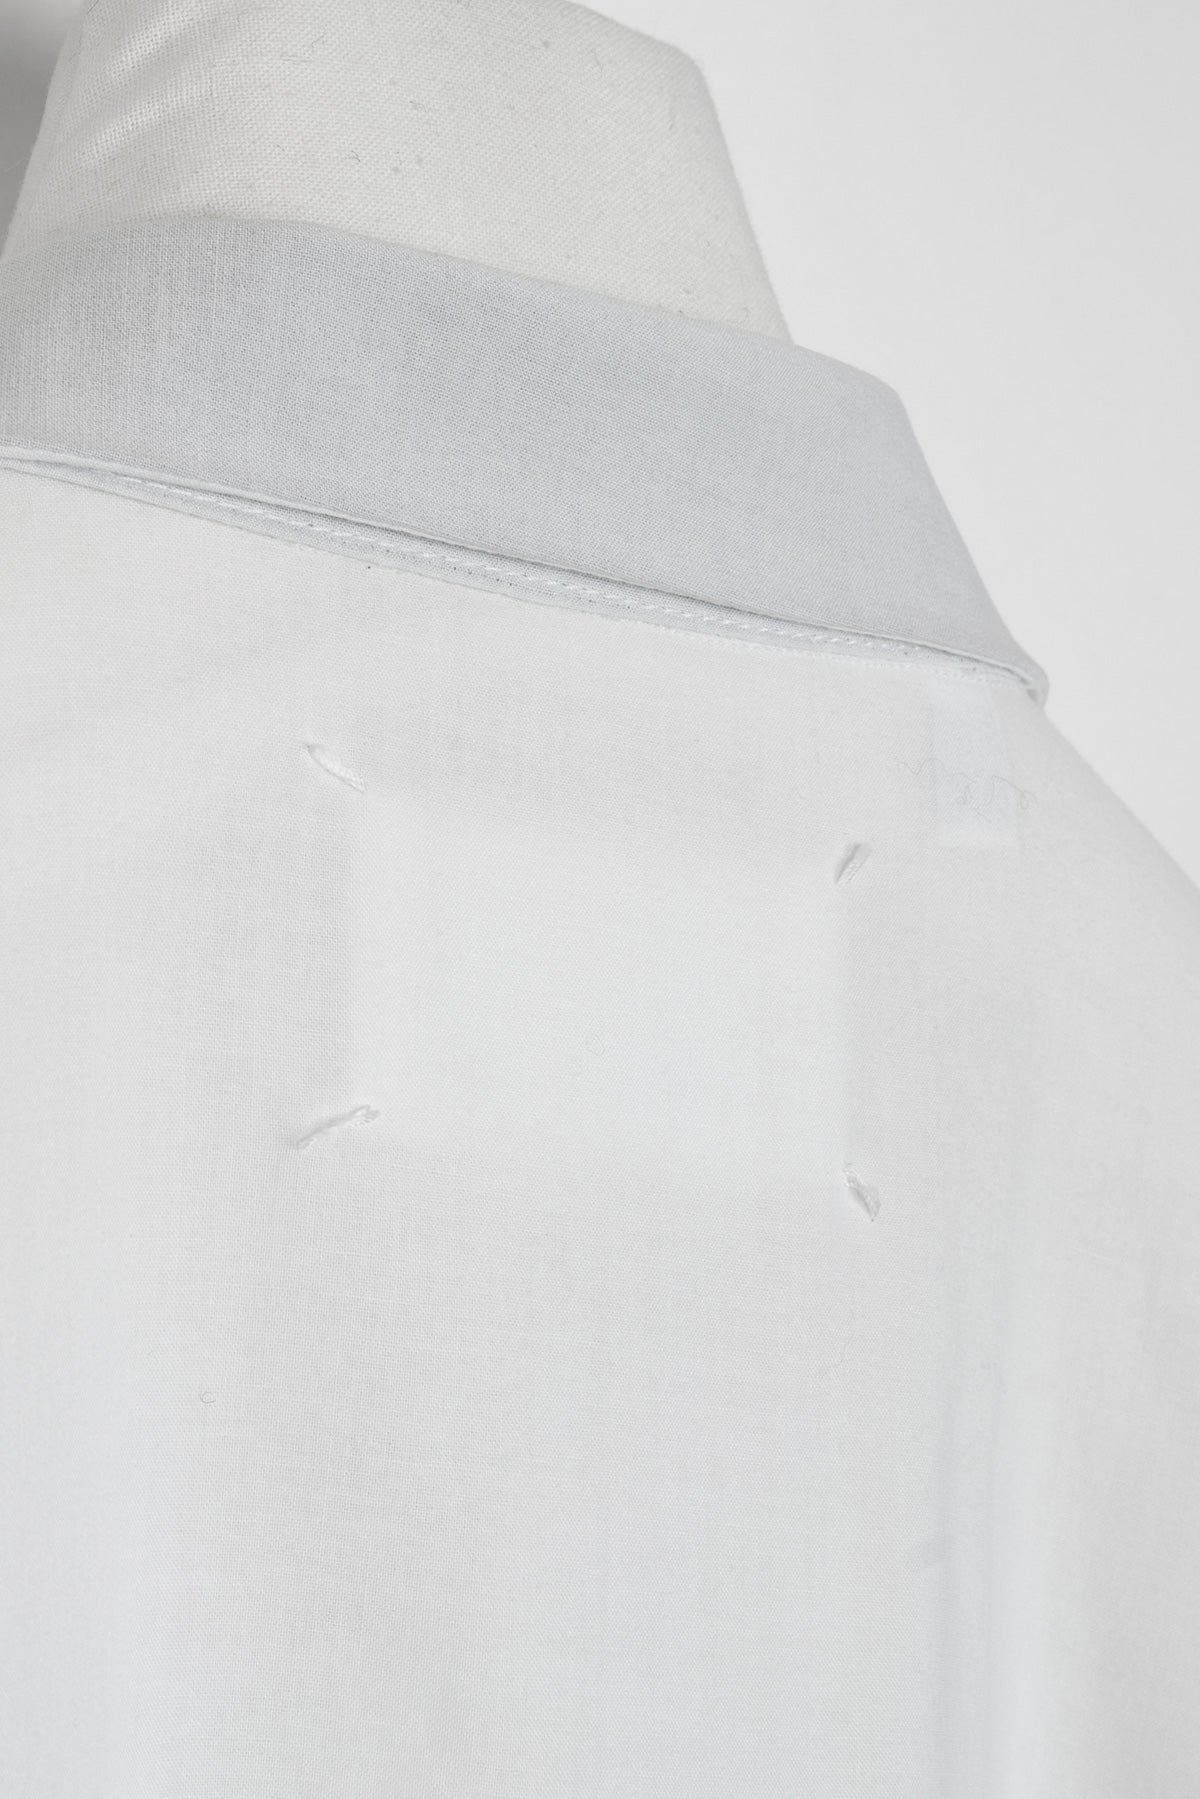 2007 A/W WHITE HIDDEN PLACKET SHIRT WITH CUFF AND COLLAR LINING DETAIL